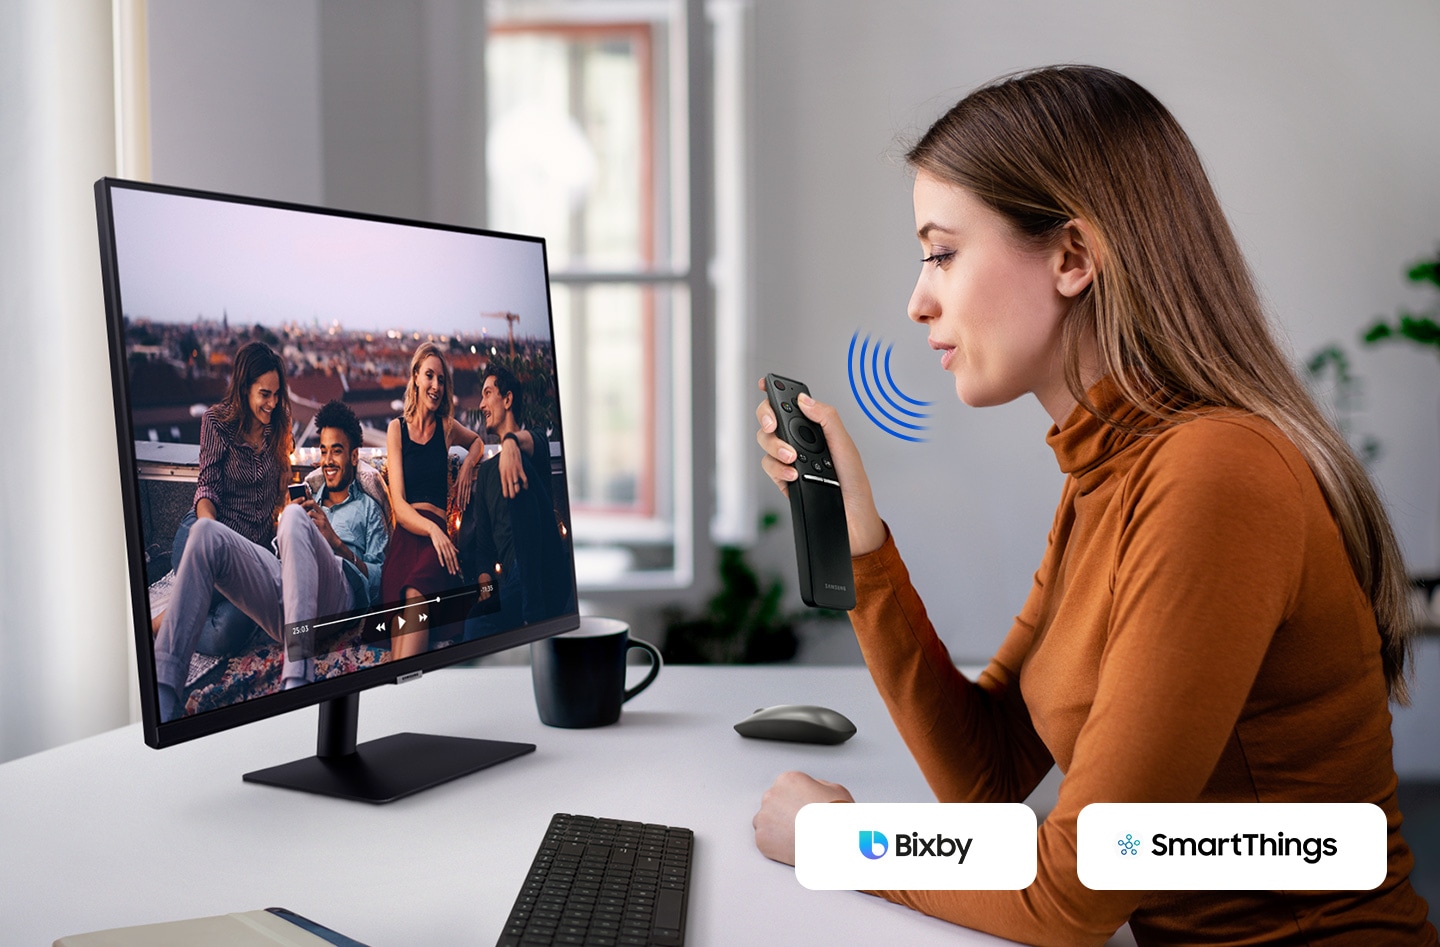 Your monitor listens to what you tell it. Switch between apps, control videos, and more through the Voice Assistant or SmartThings app.